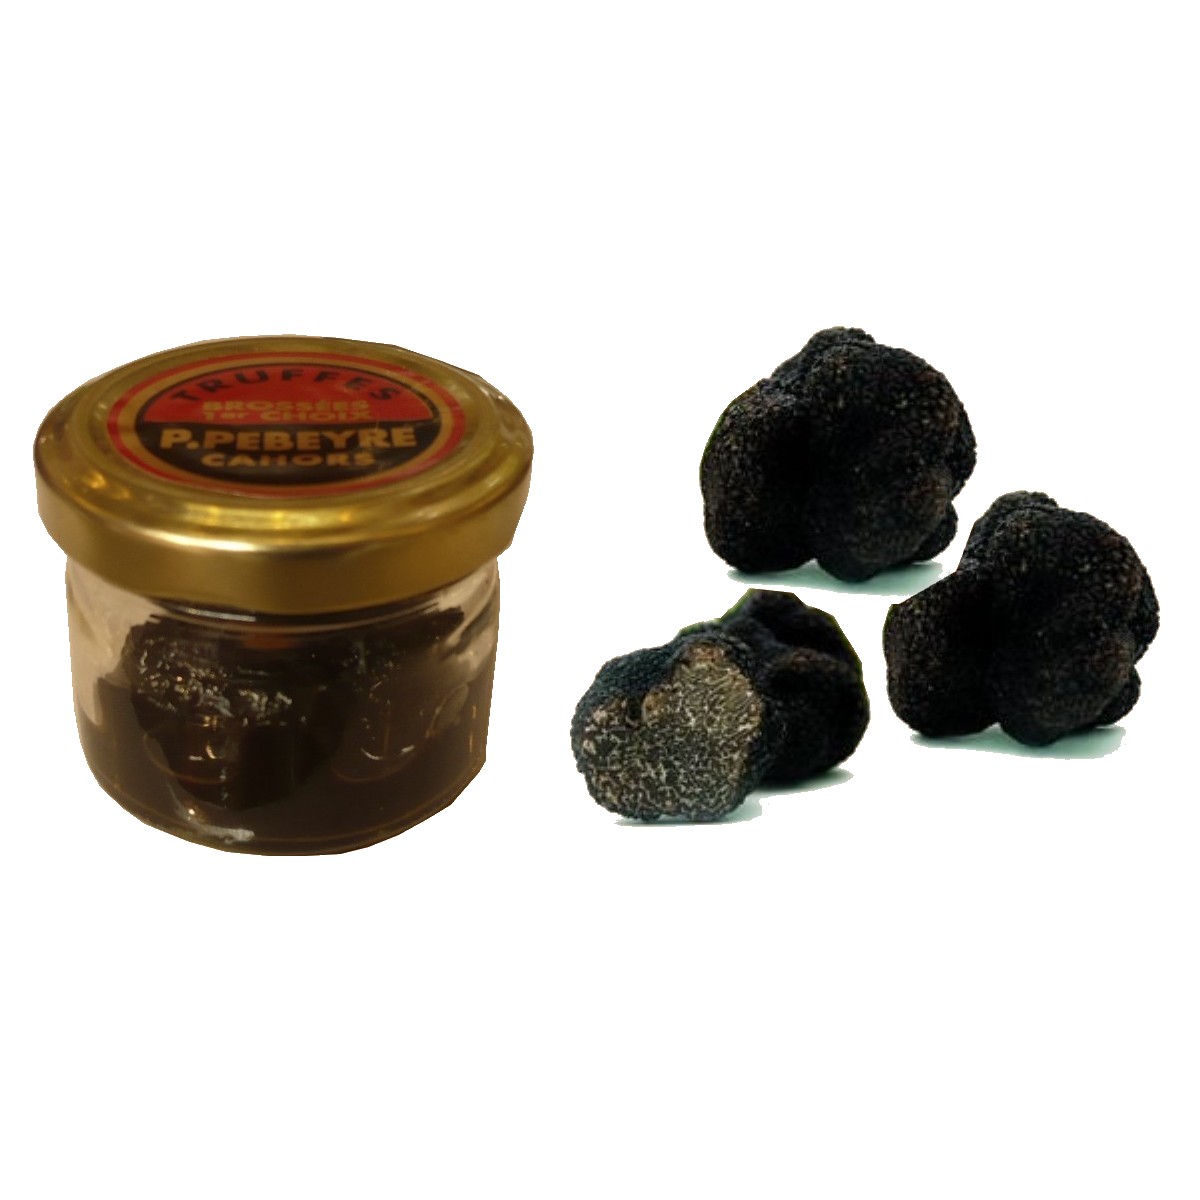 truffes entieres pebeyre